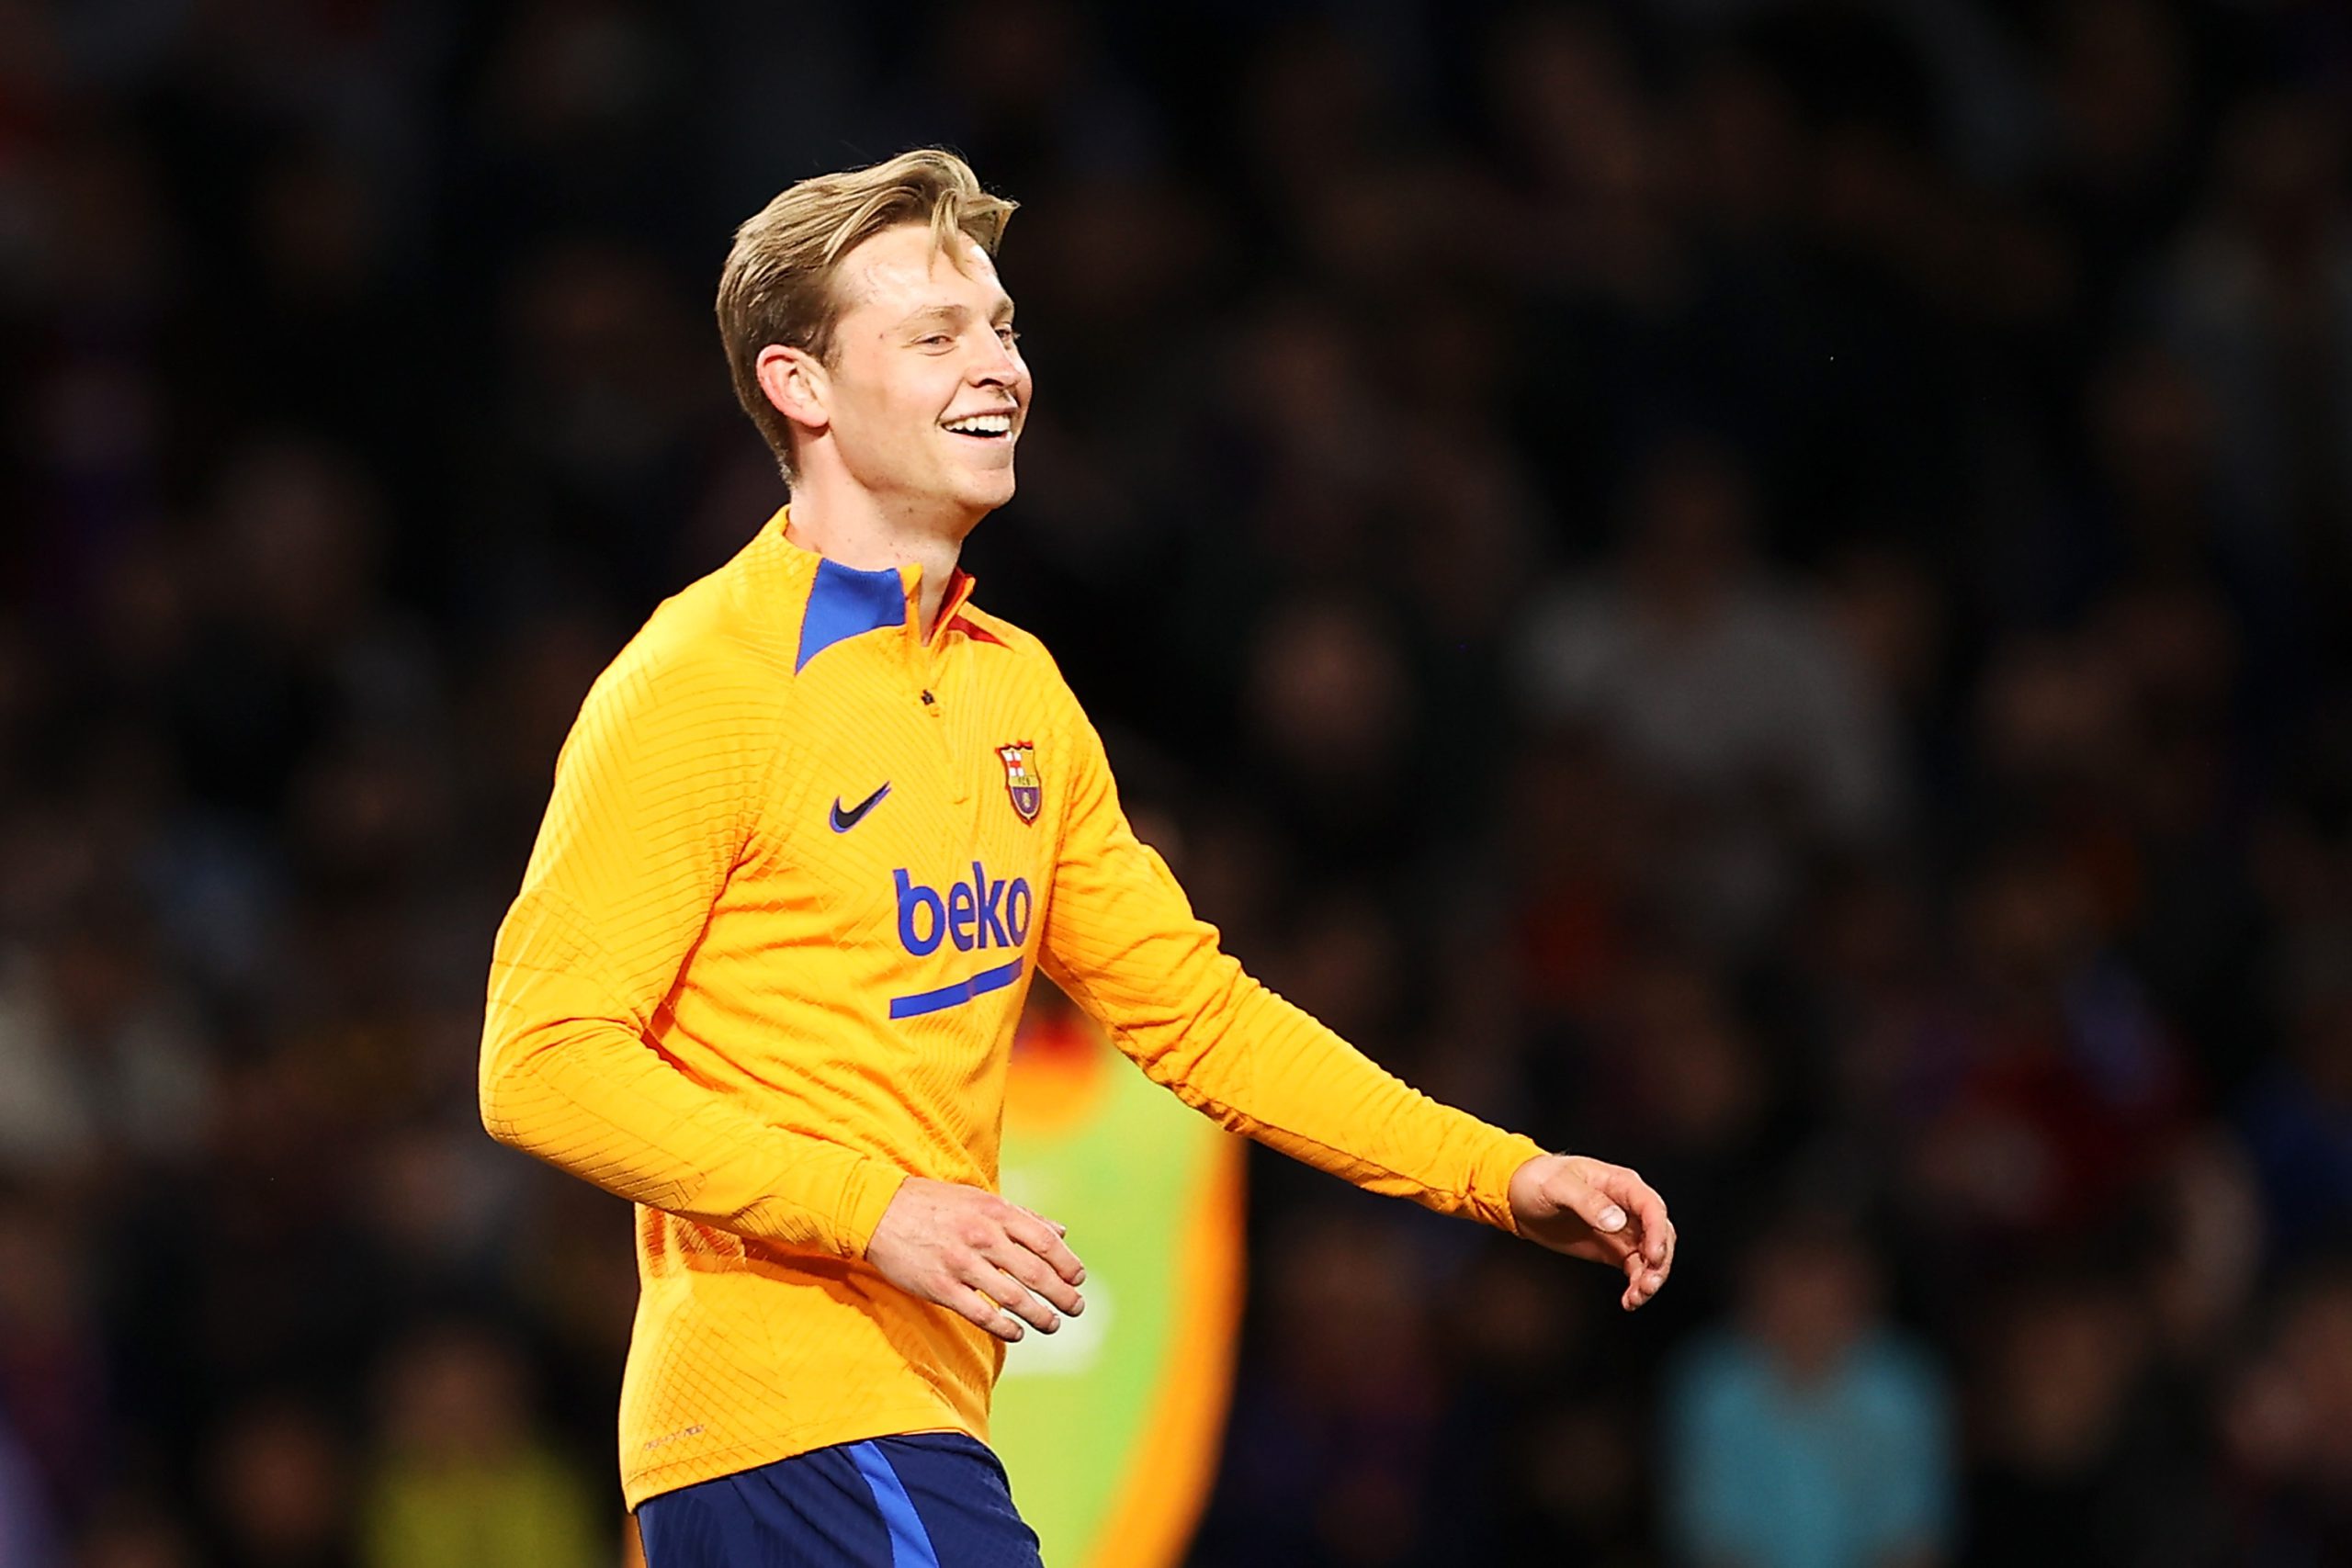 Manchester Uni  manchester united jersey by year  ted fear Barcelona’s asking price for Frenkie De Jong is too high